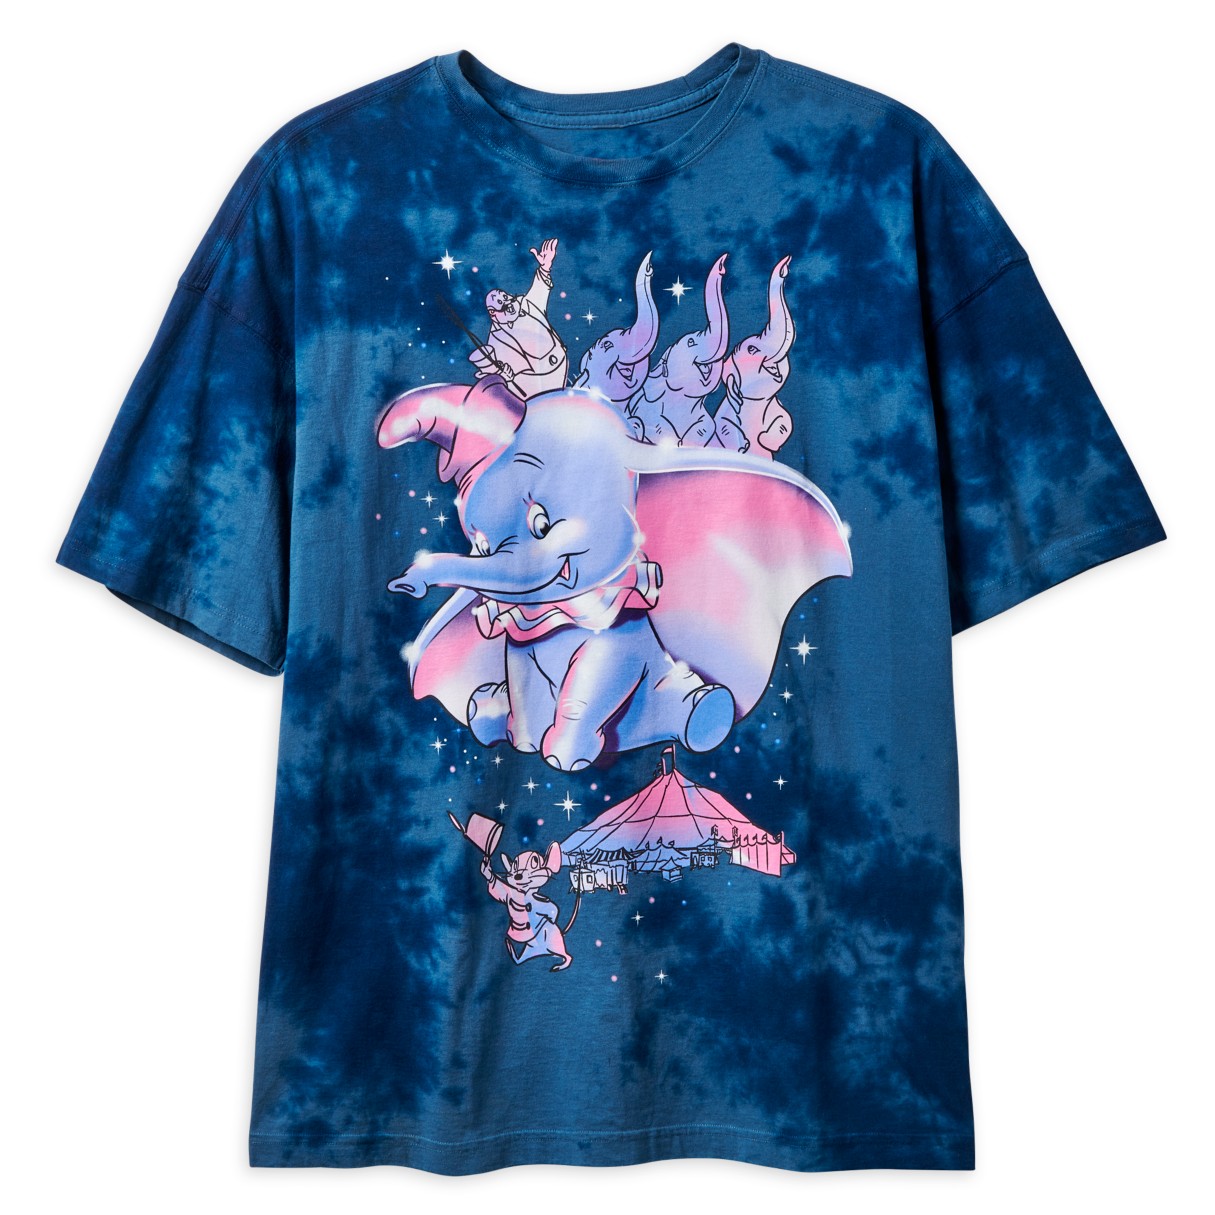 Dumbo Tie-Dye T-Shirt for Adults